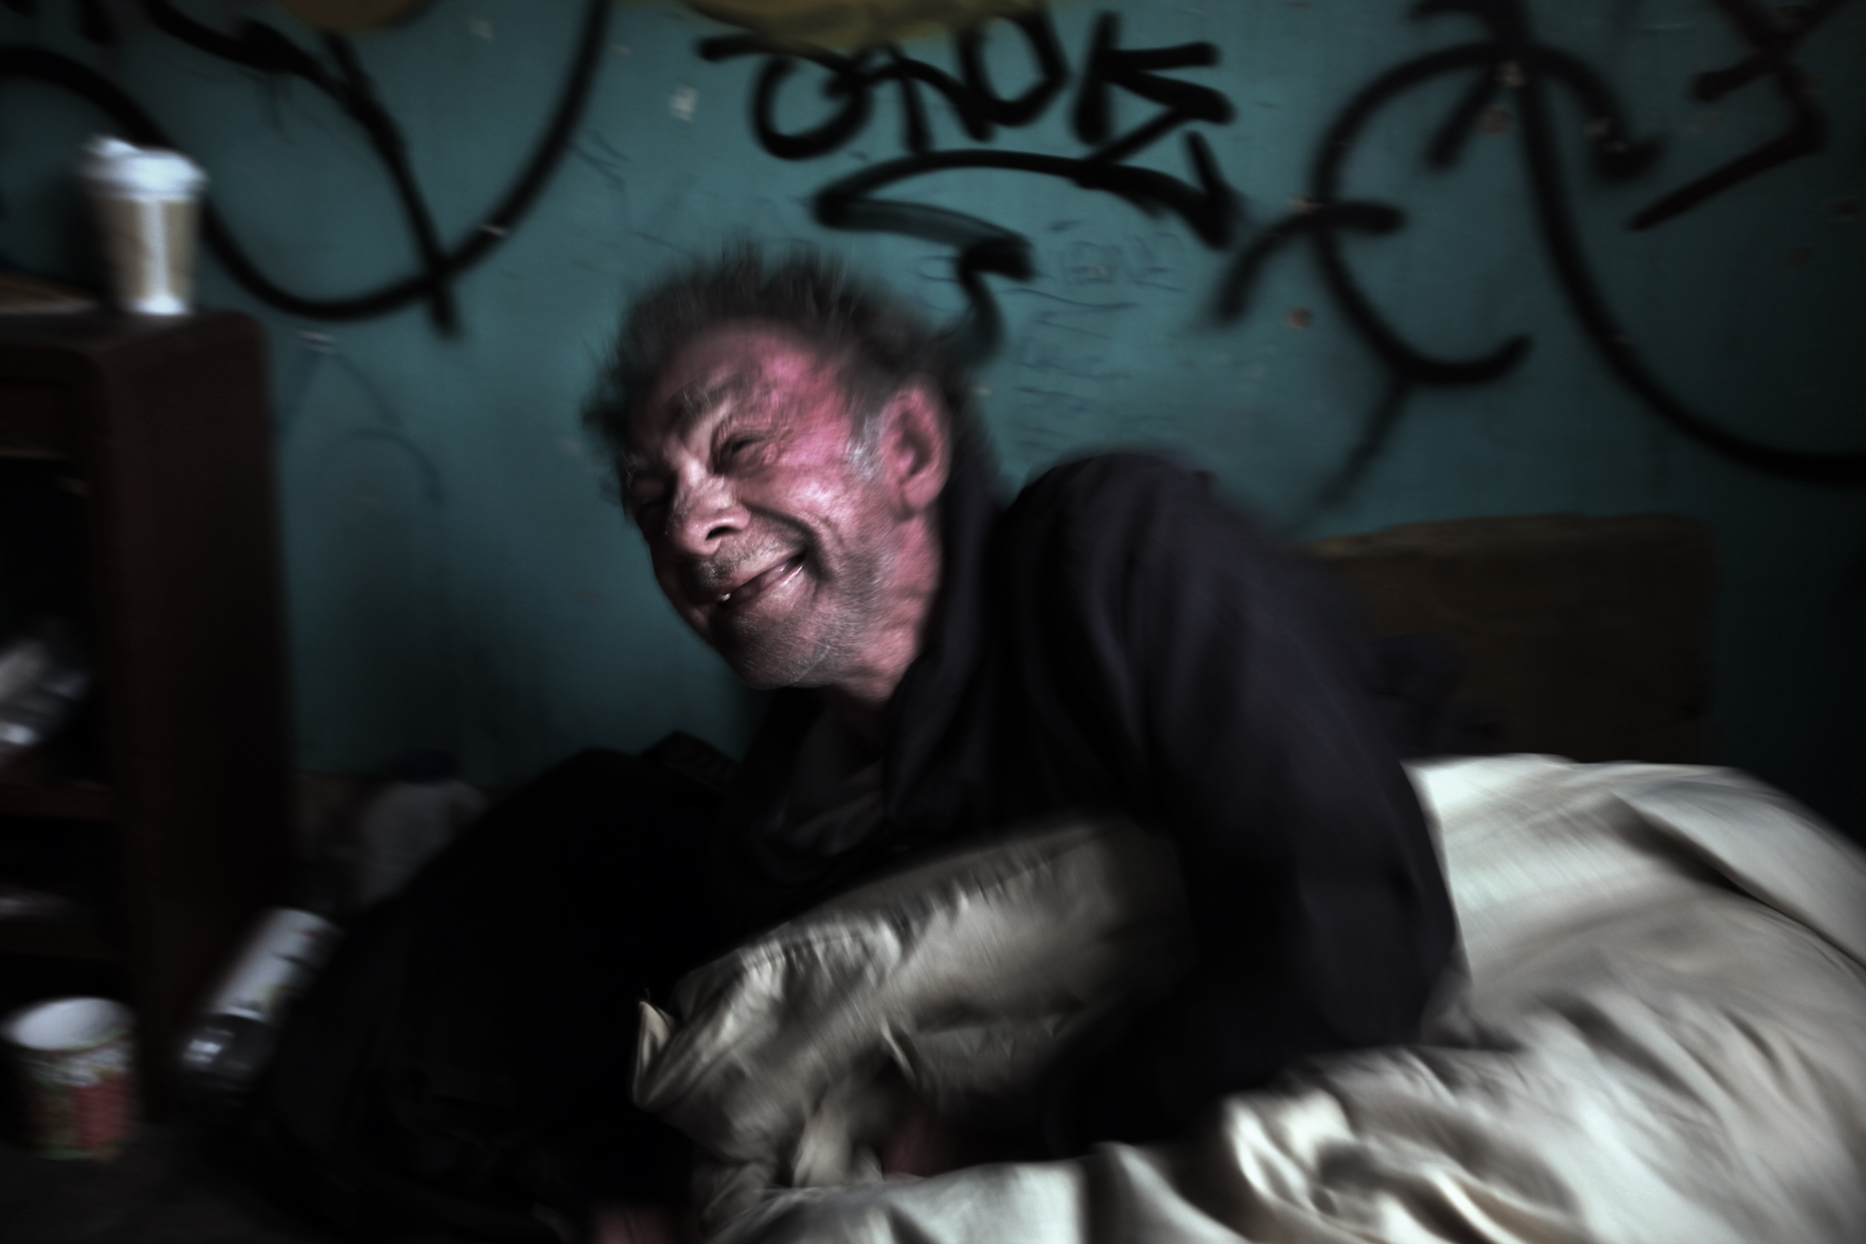 Dennis has been an alcoholic and homeless for an astonishing thirty-five years.